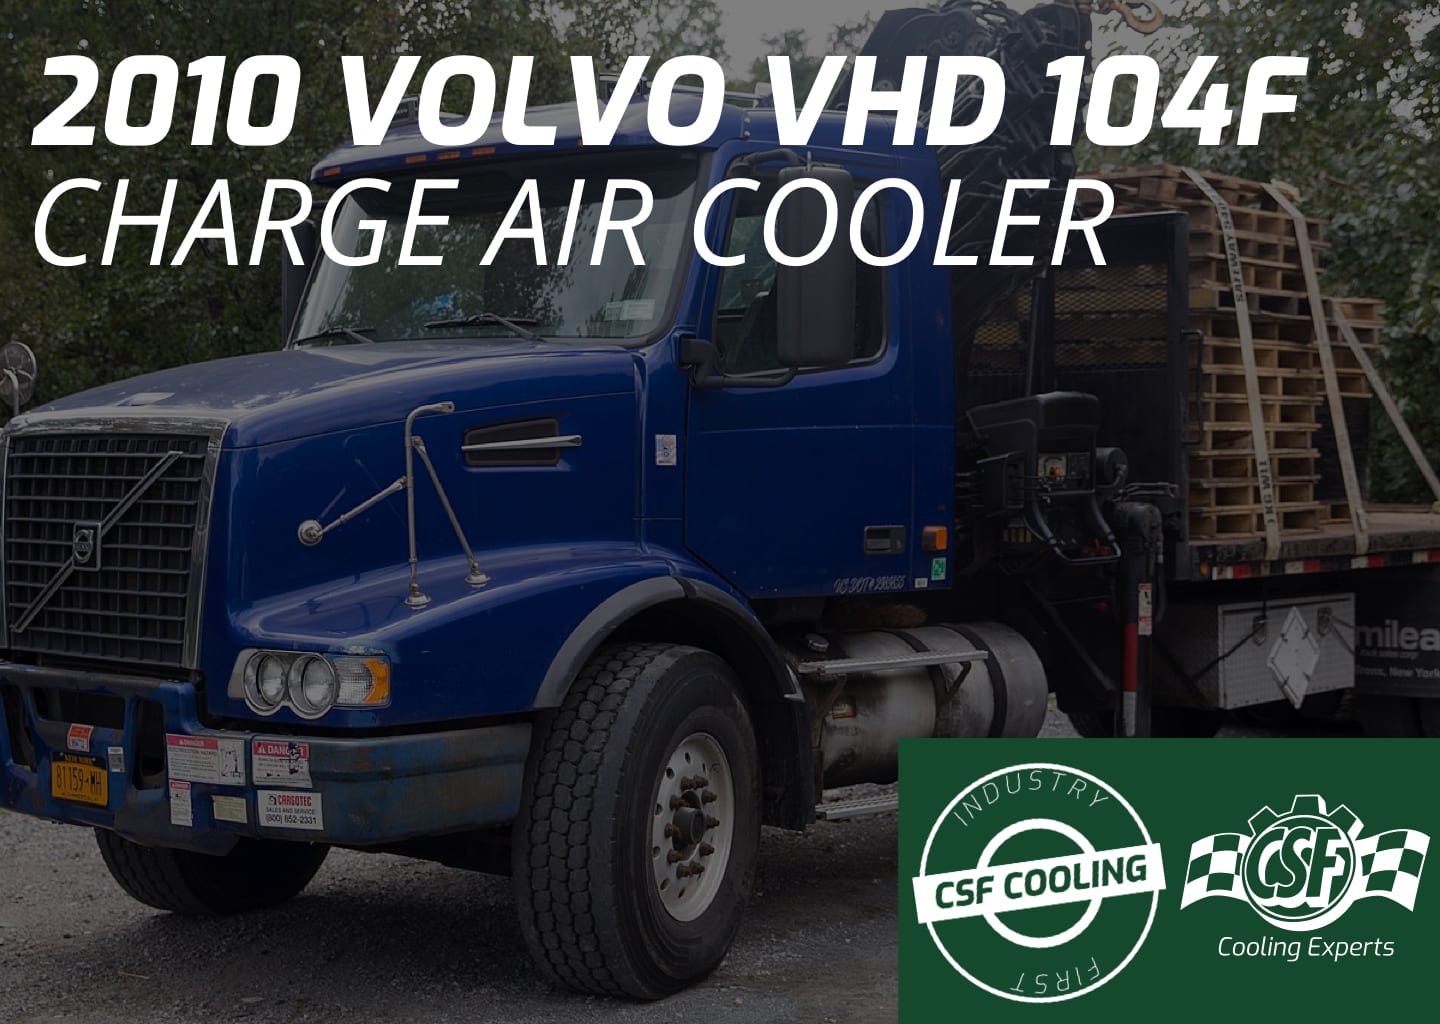 2010 Volvo VHD 104F Charge Air Cooler